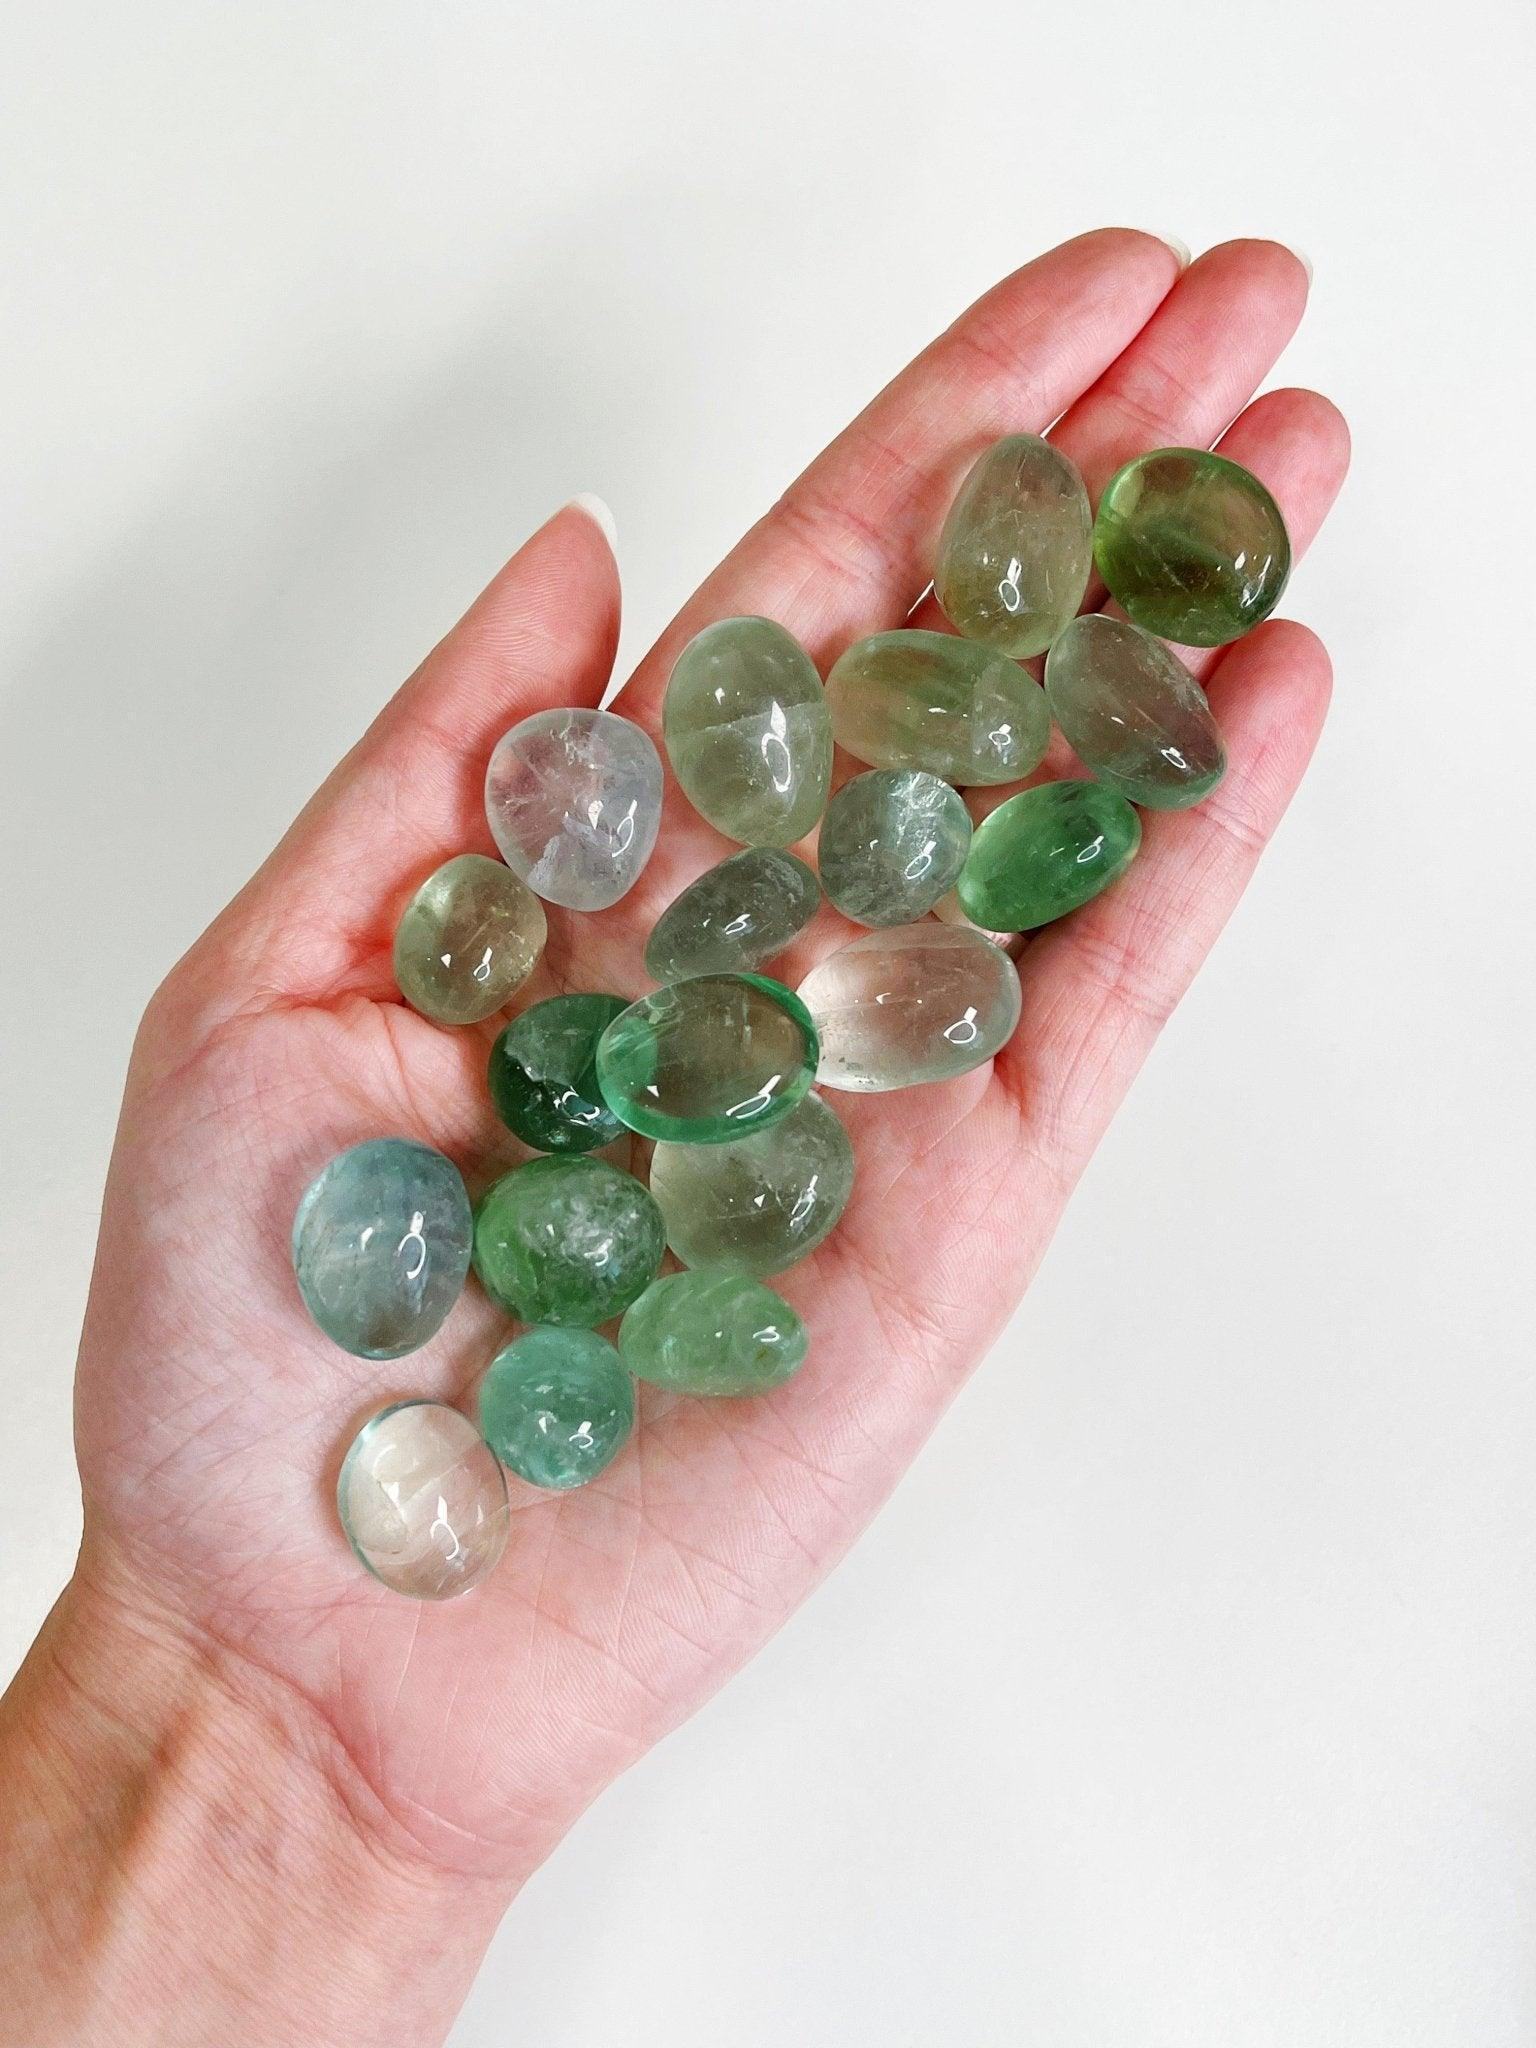 GREEN FLUORITE TUMBLE - 33 bday, 444 sale, bulk, end of year sale, fluorite, focus gift bundle, green fluorite, holiday sale, mercury rx, new year sale, pocket crystal, pocket stone, tumble, update - The Mineral Maven